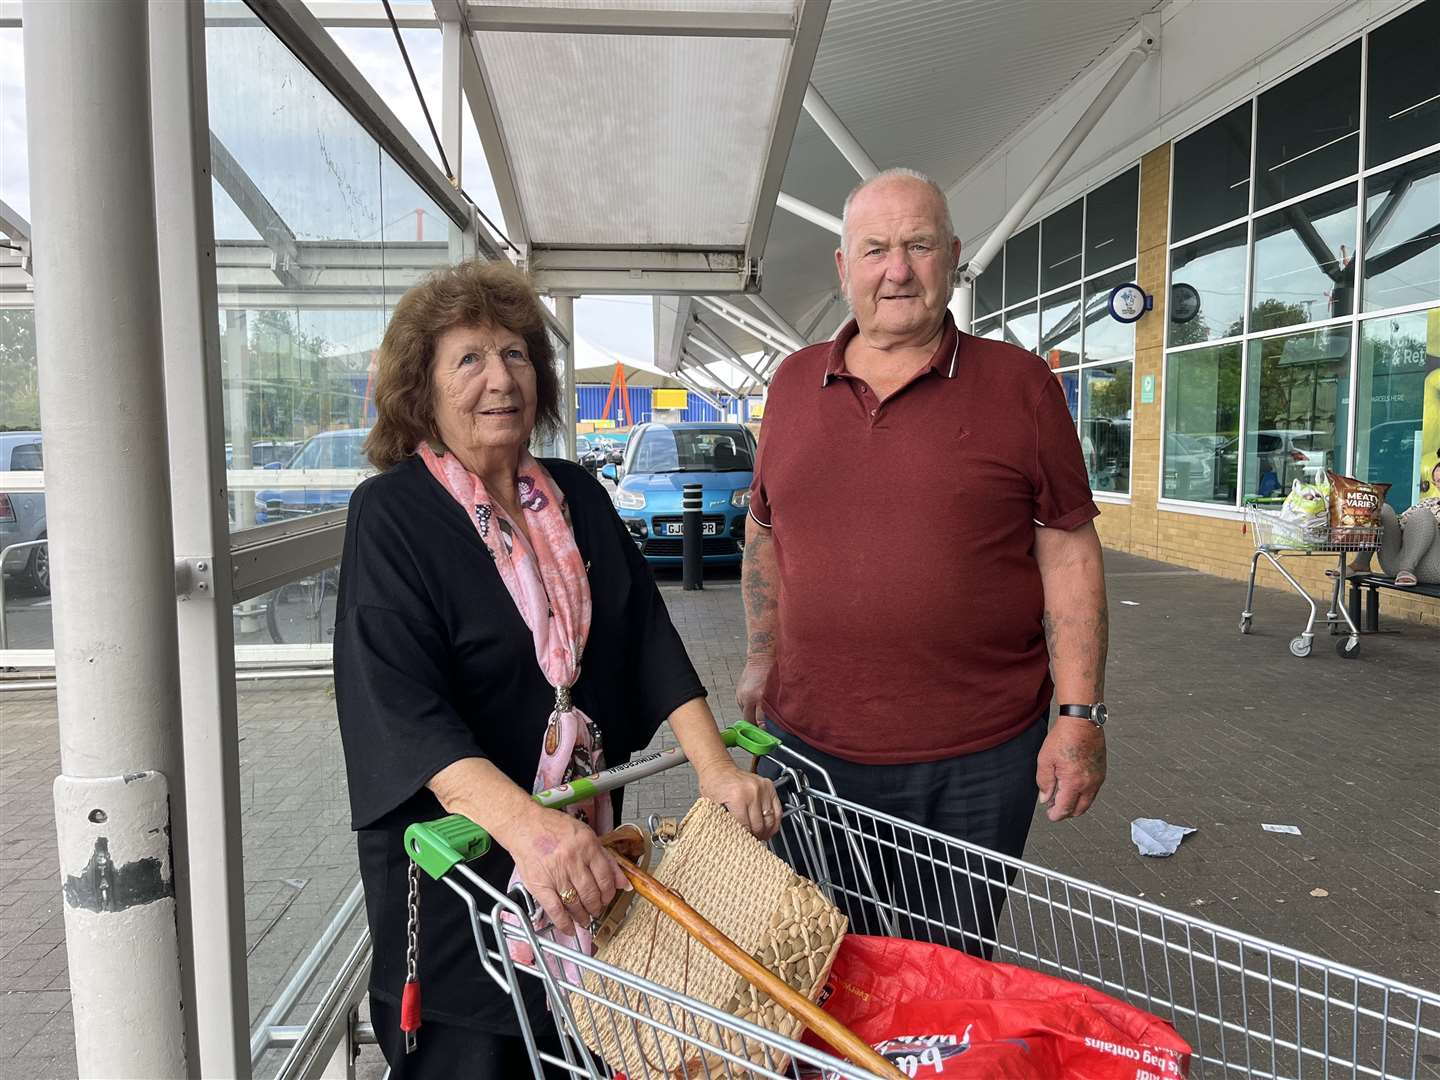 Mary and Tony managed to get hold of a trolley ahead of their shop at the Ashford Asda